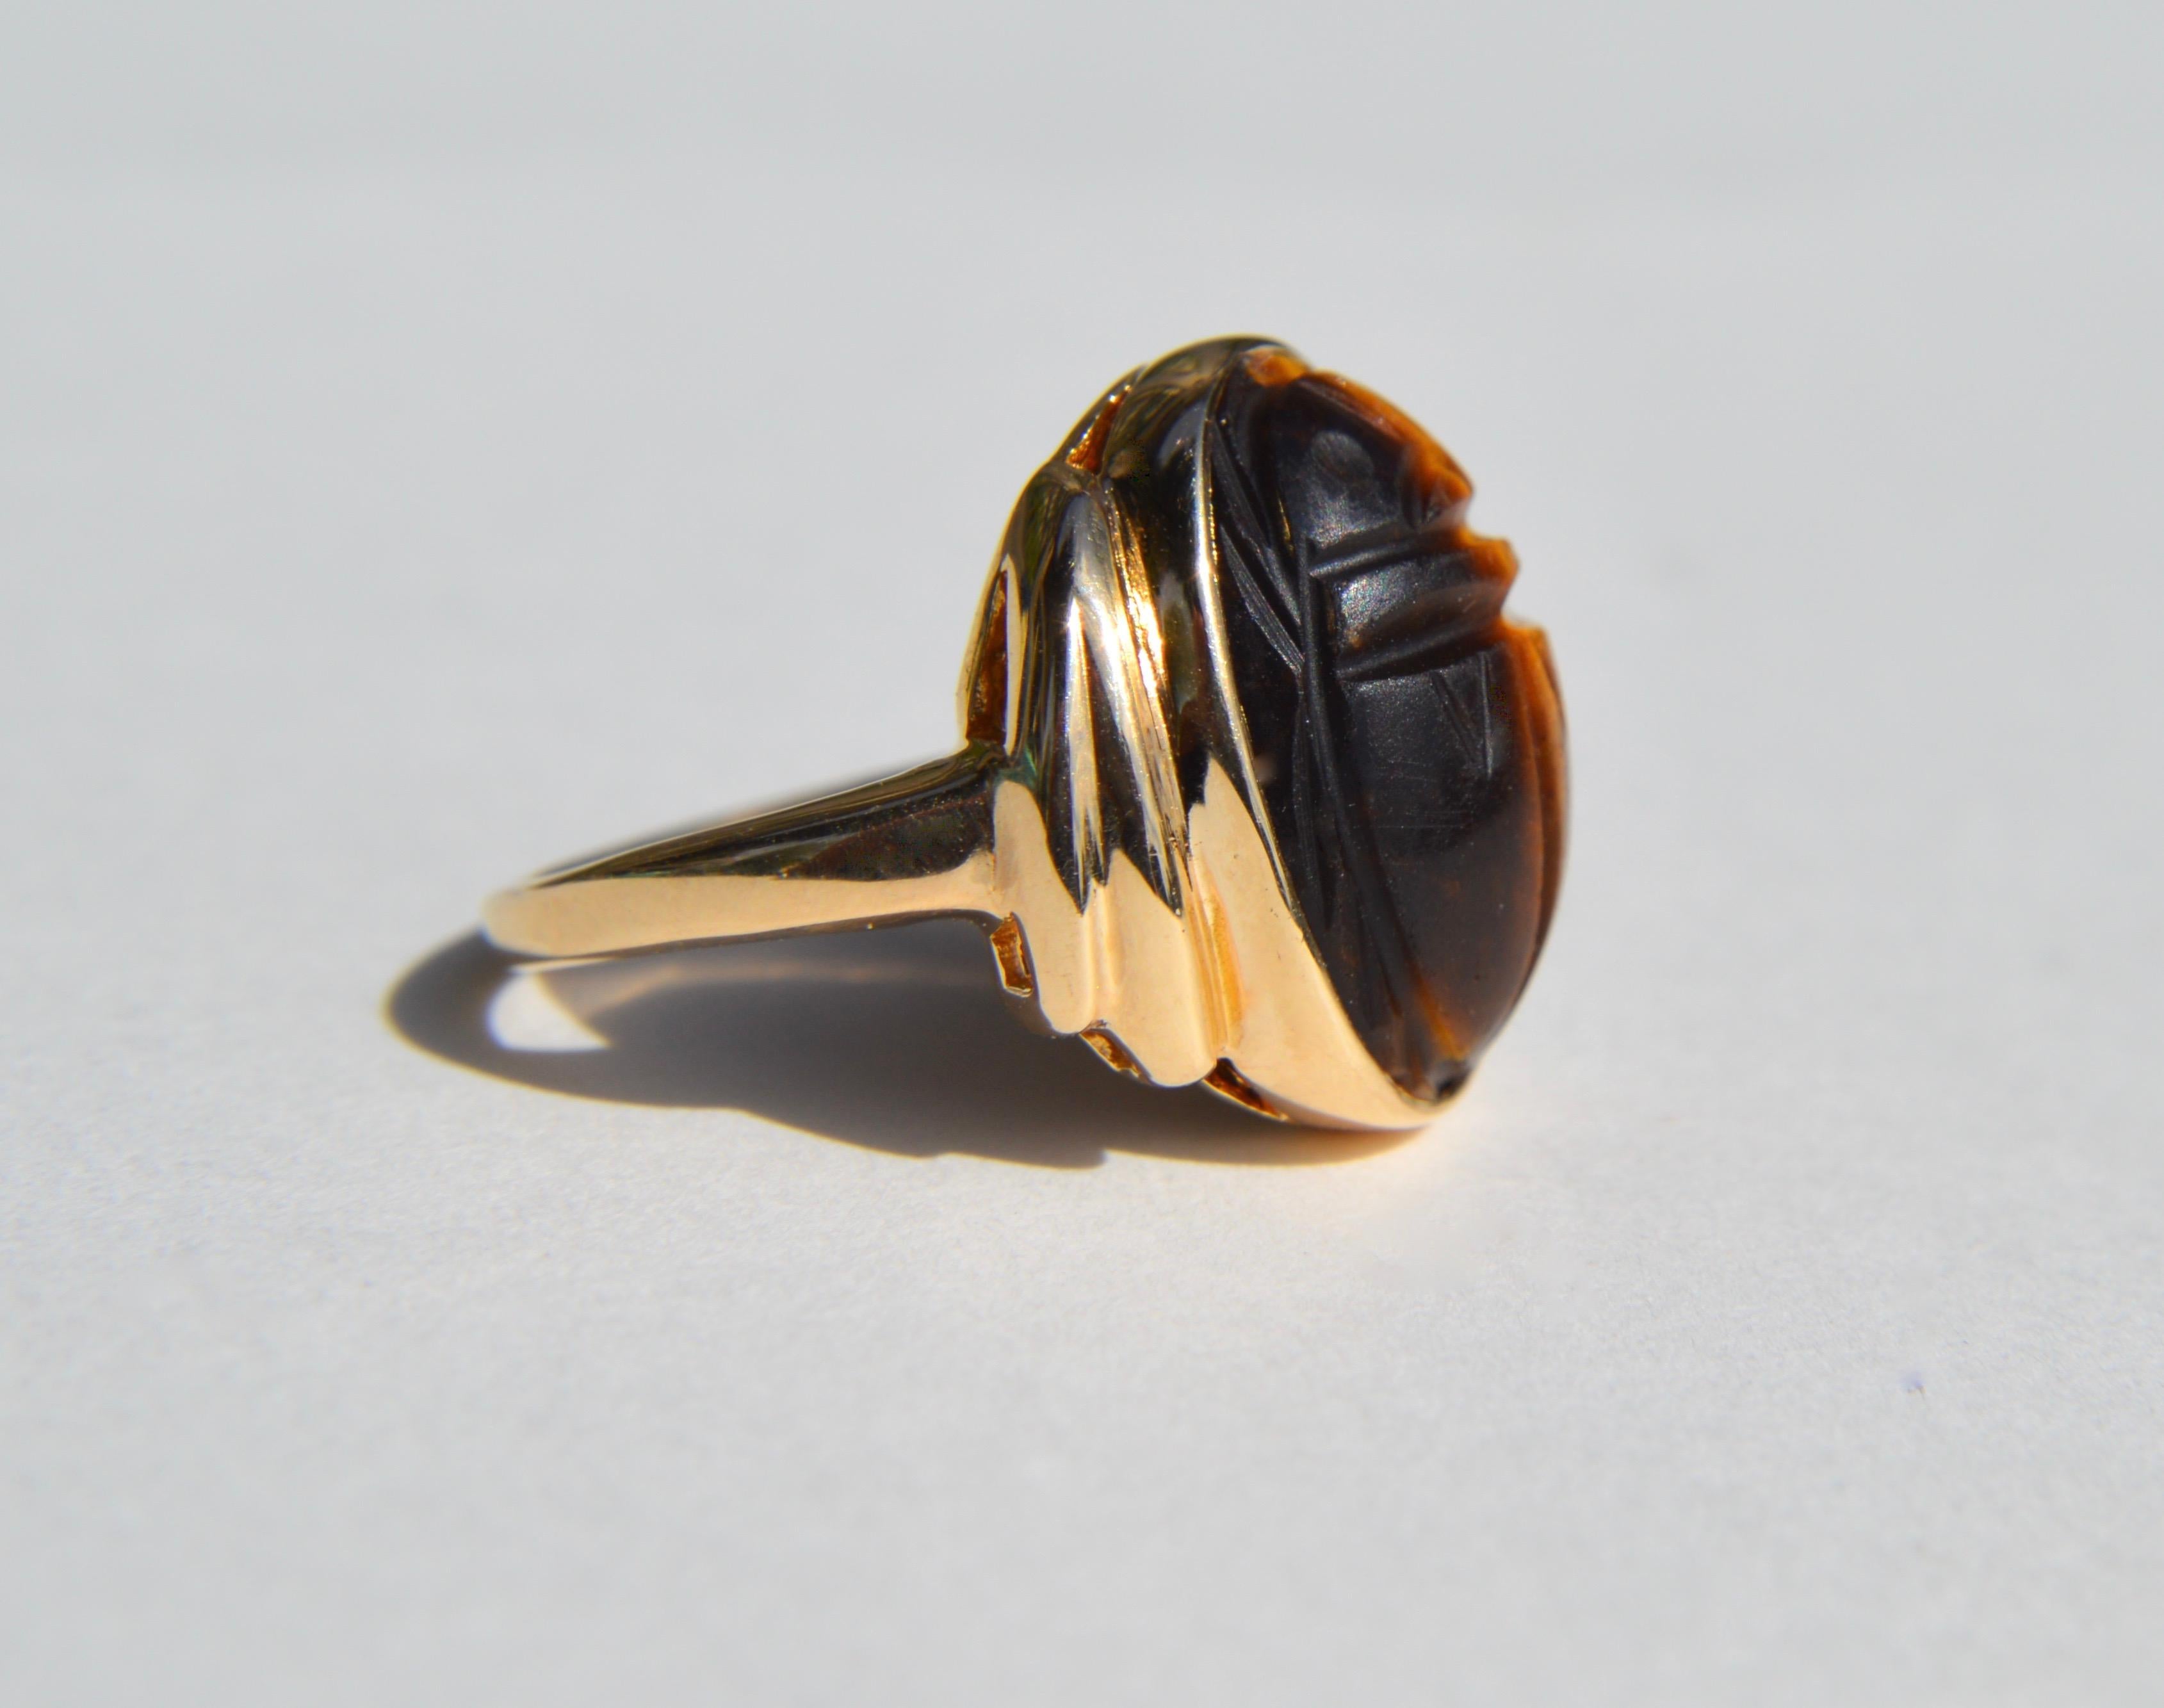 Beautiful vintage 10K yellow gold tiger'ss eye scarab beetle ring. Size 4.25, can be resized by a jeweler. In very good condition. Ring is unmarked, but acid tested as solid 10K gold. Stone measures 15x11 mm.

Tiger's eye properties:
A stone of